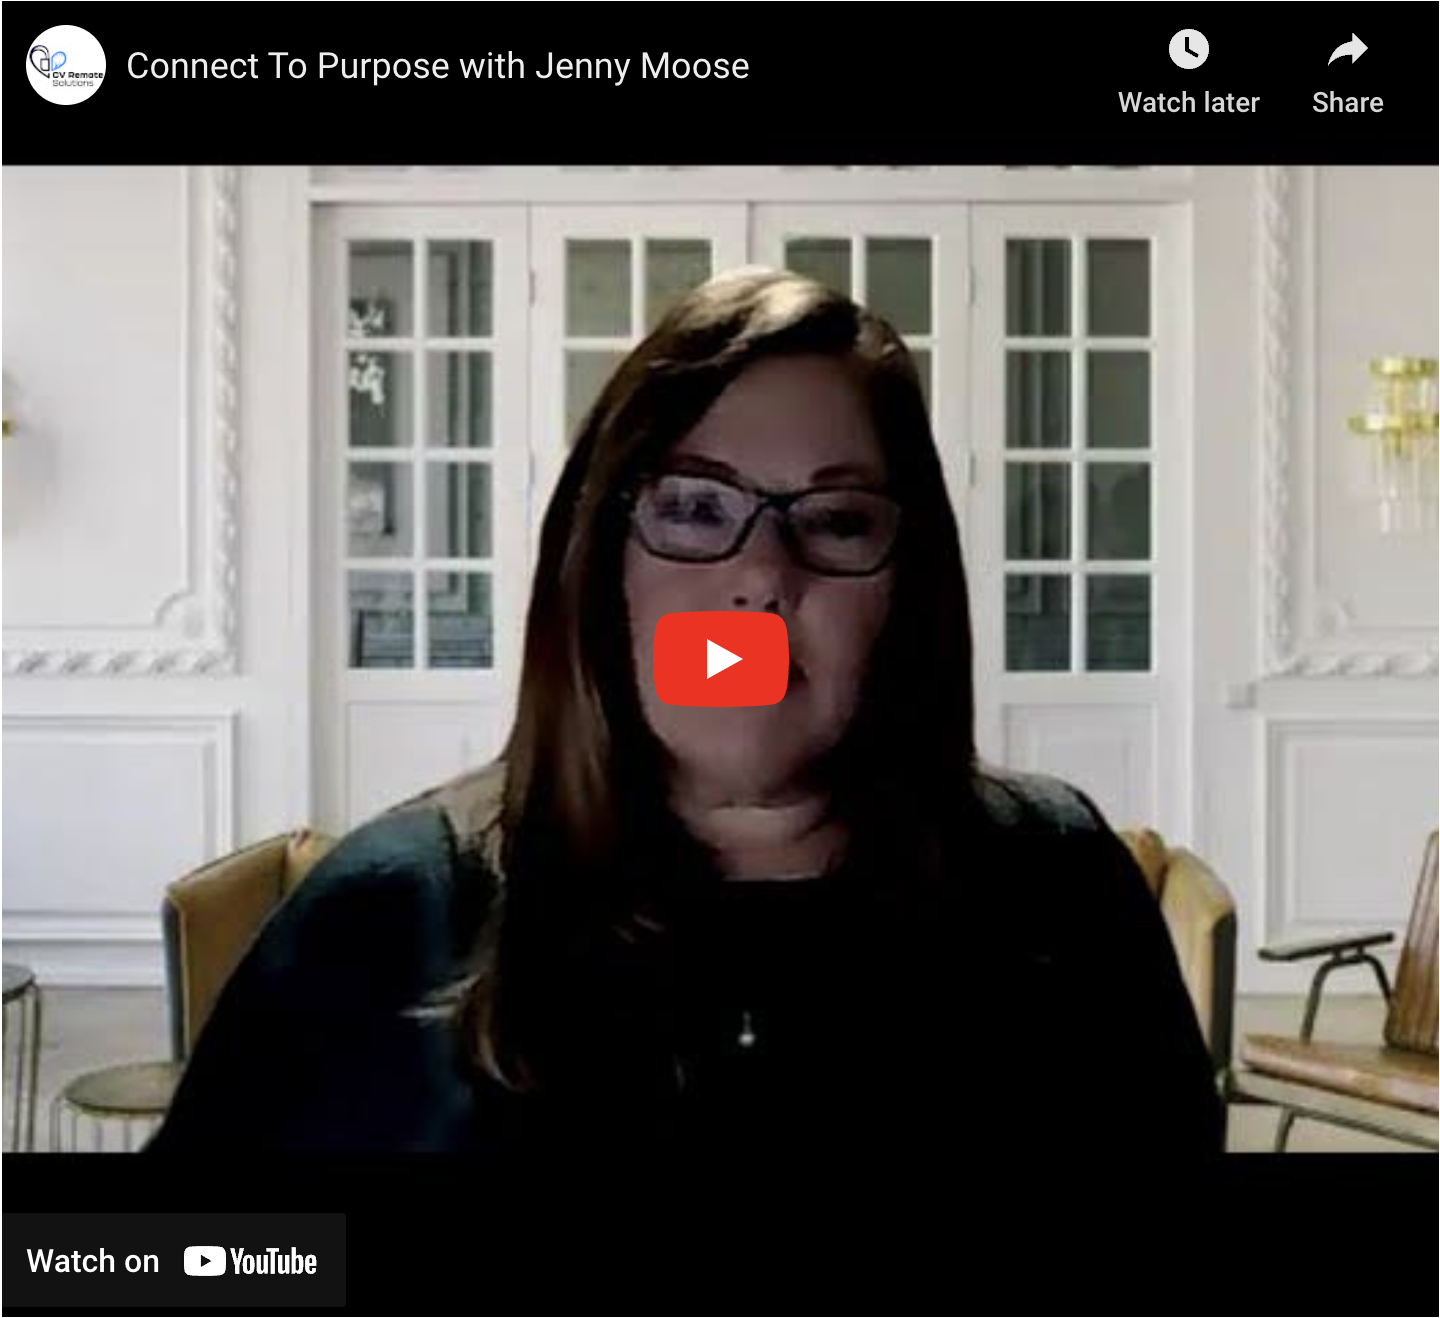 Connect to Purpose series video one with Jenny Moose.